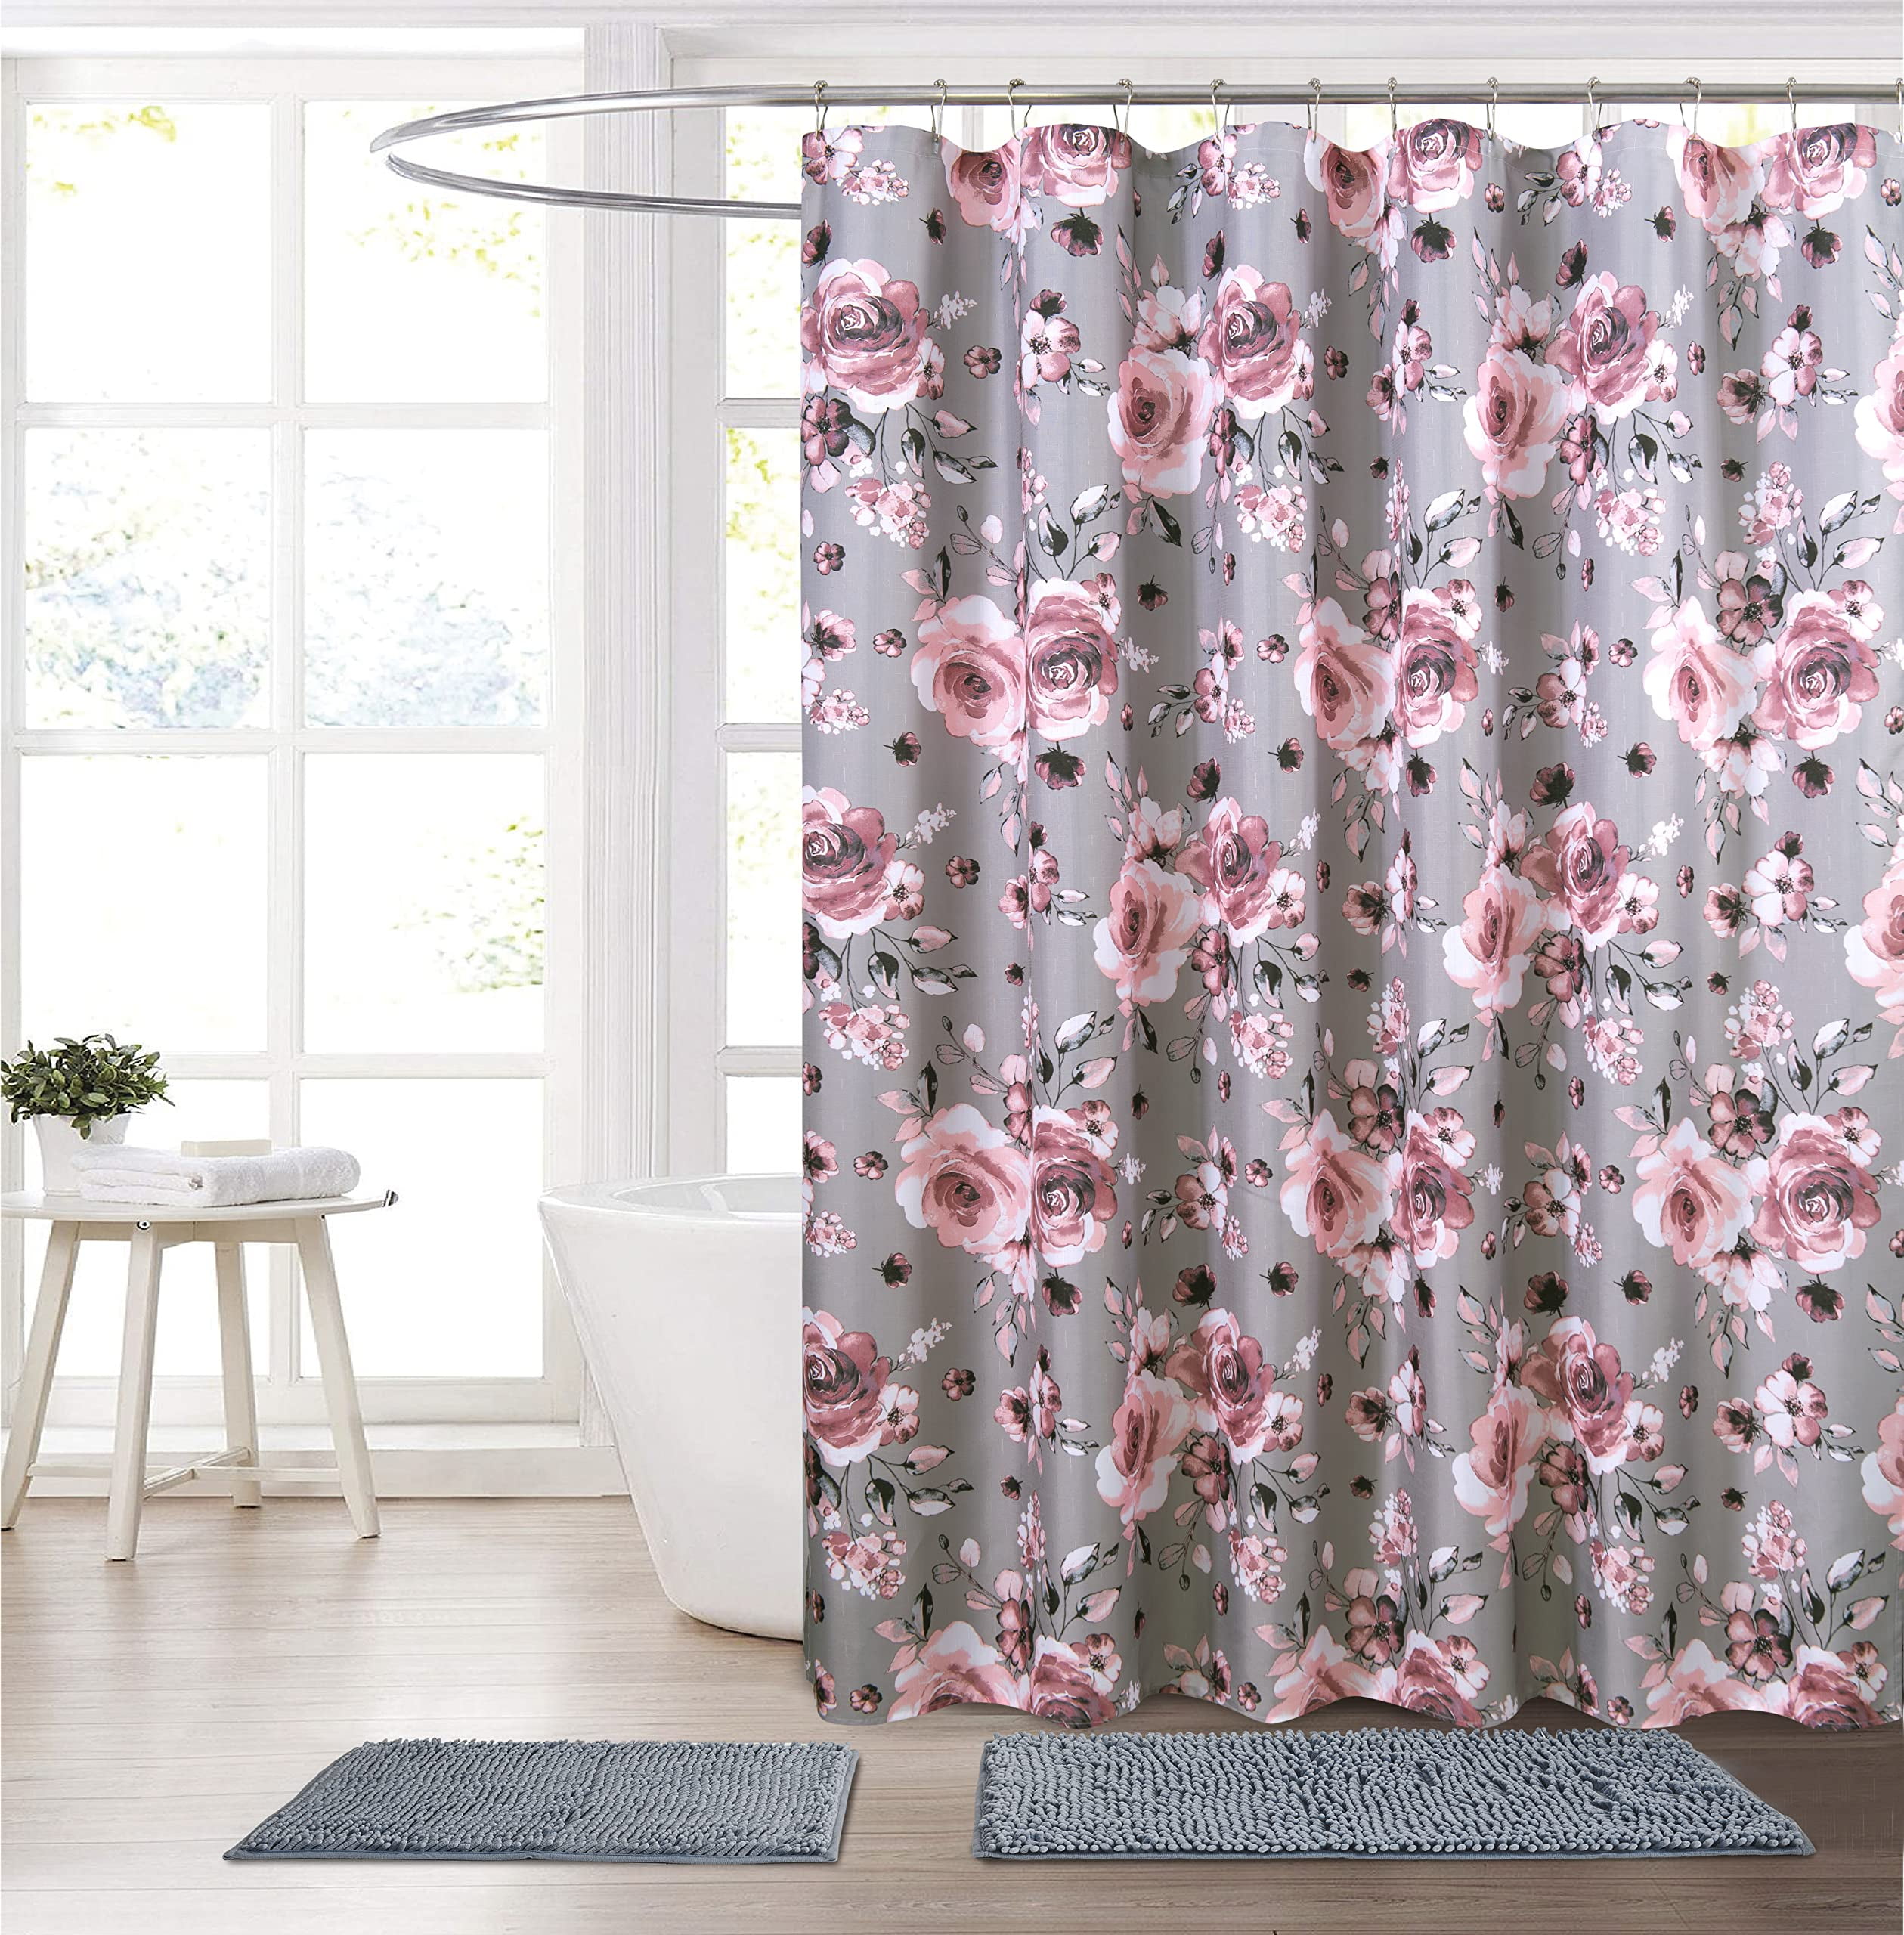 Coral Blush Flower Floral Pattern Cotton Fabric Shower Curtain 